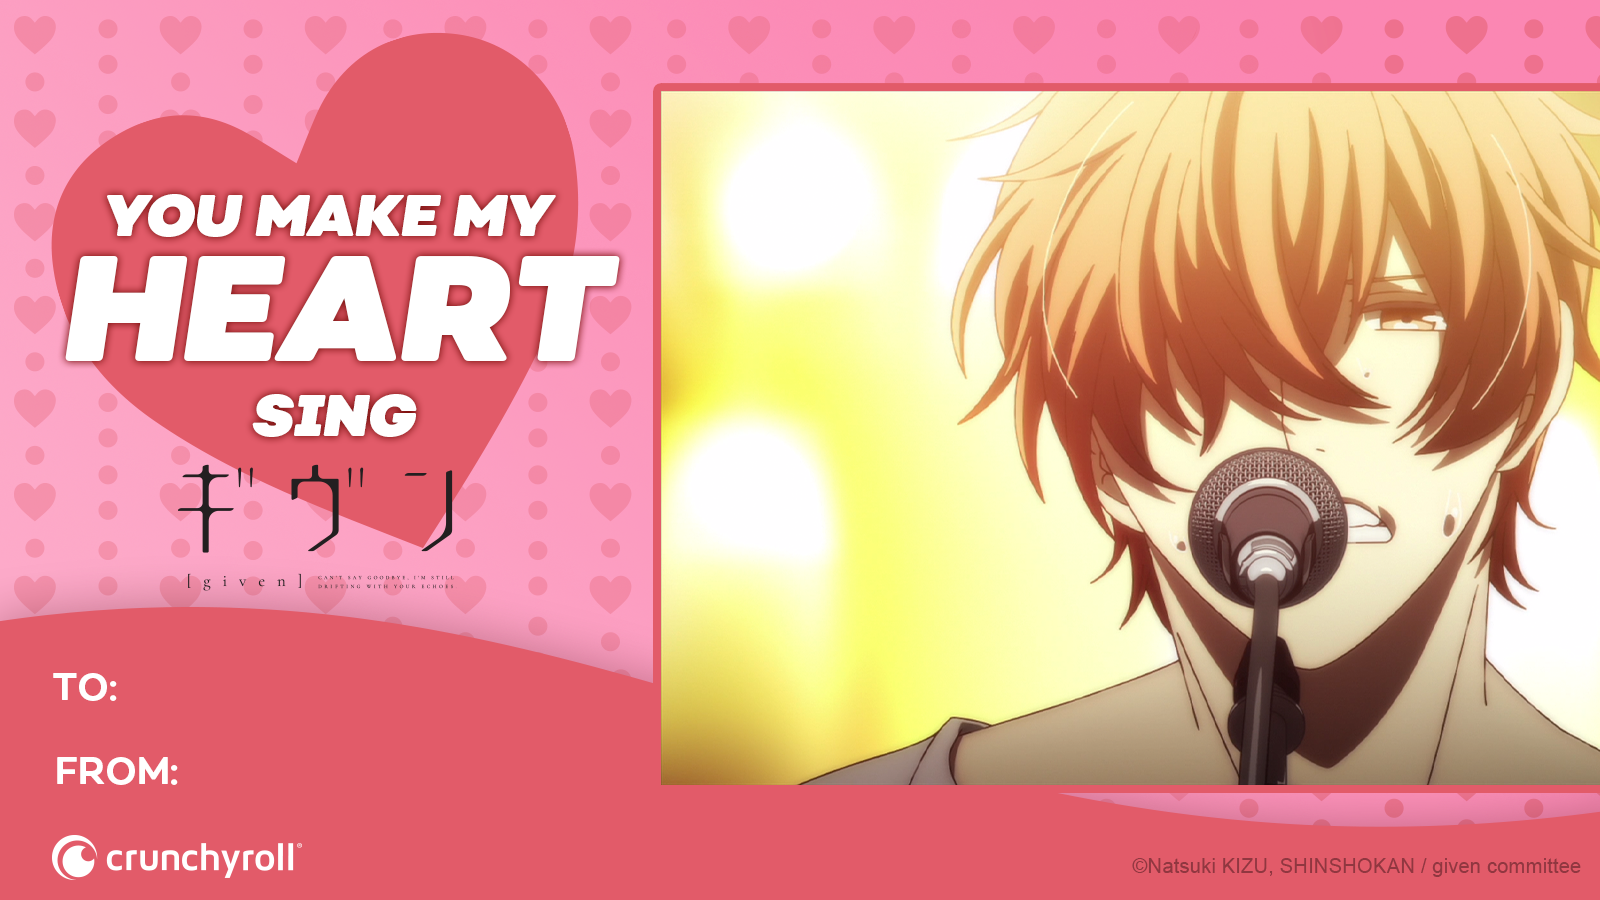 FEATURE: Give the Gift of Anime with Crunchyroll's Exclusive Valentine's Day Cards